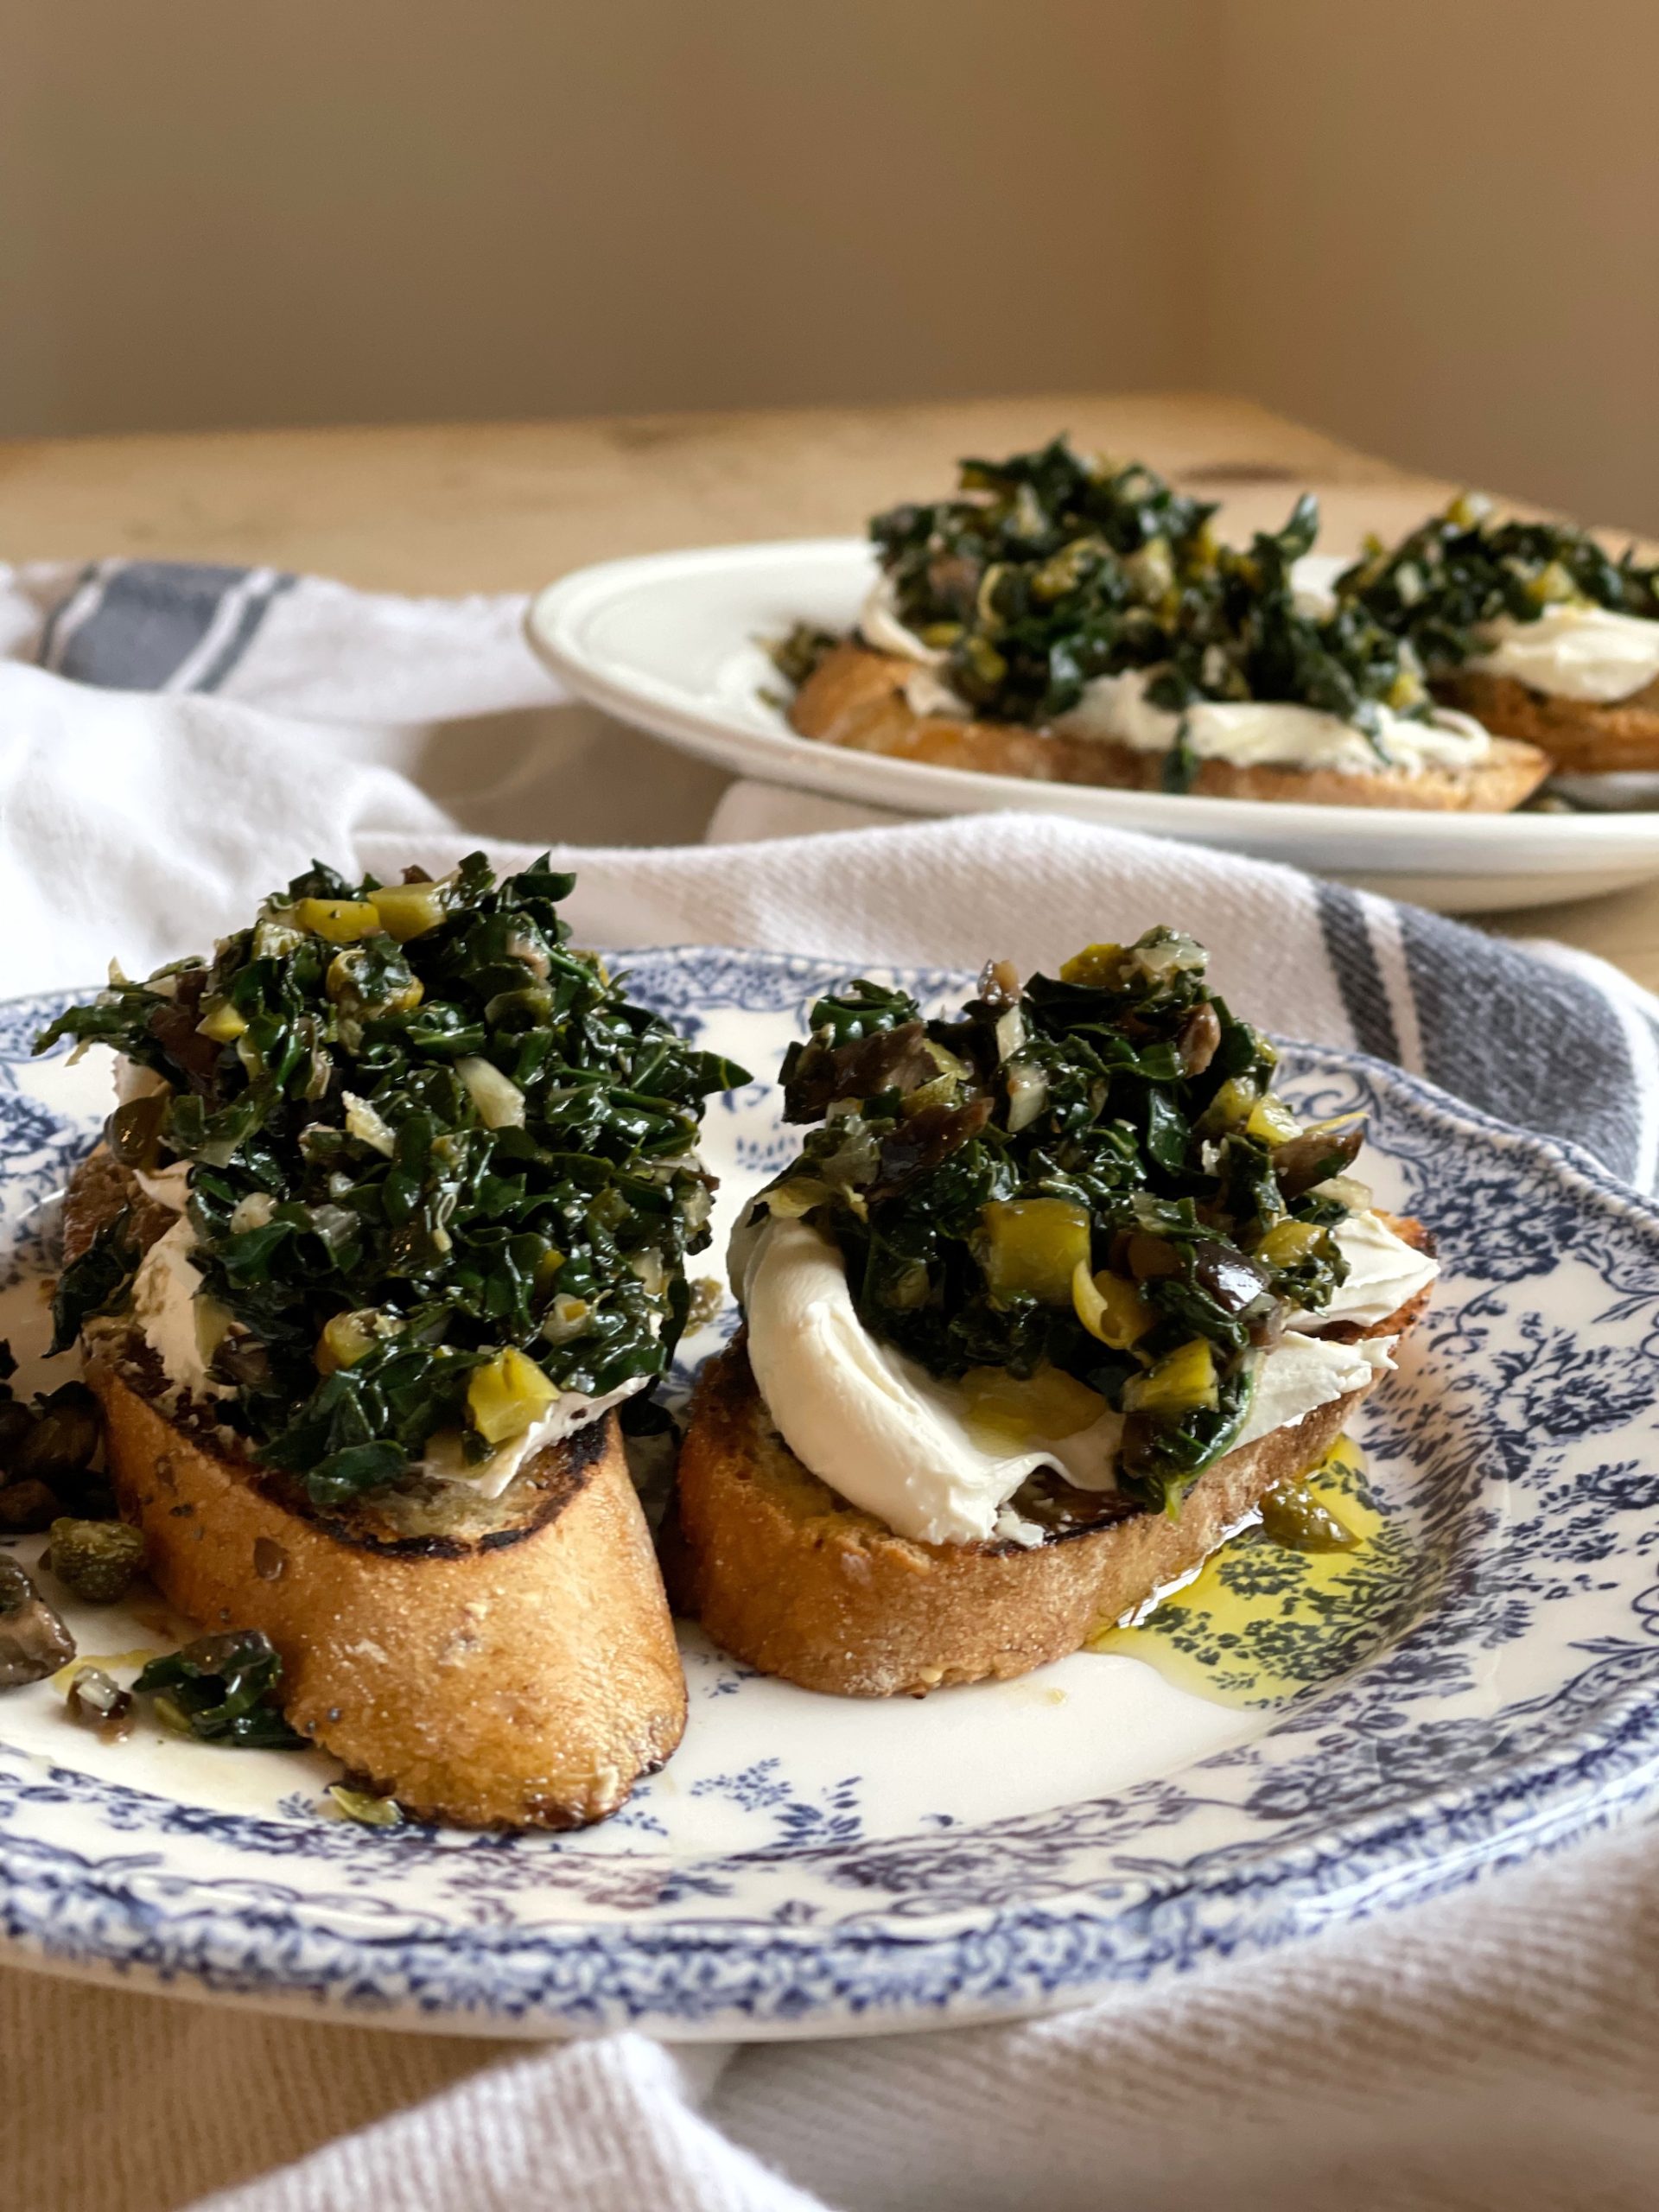 A recipe for kale bruschetta. A mixture of kale or cavelo nero with capers, olives, cornichons and herbs on a garlicky toasts with soft goat's cheese